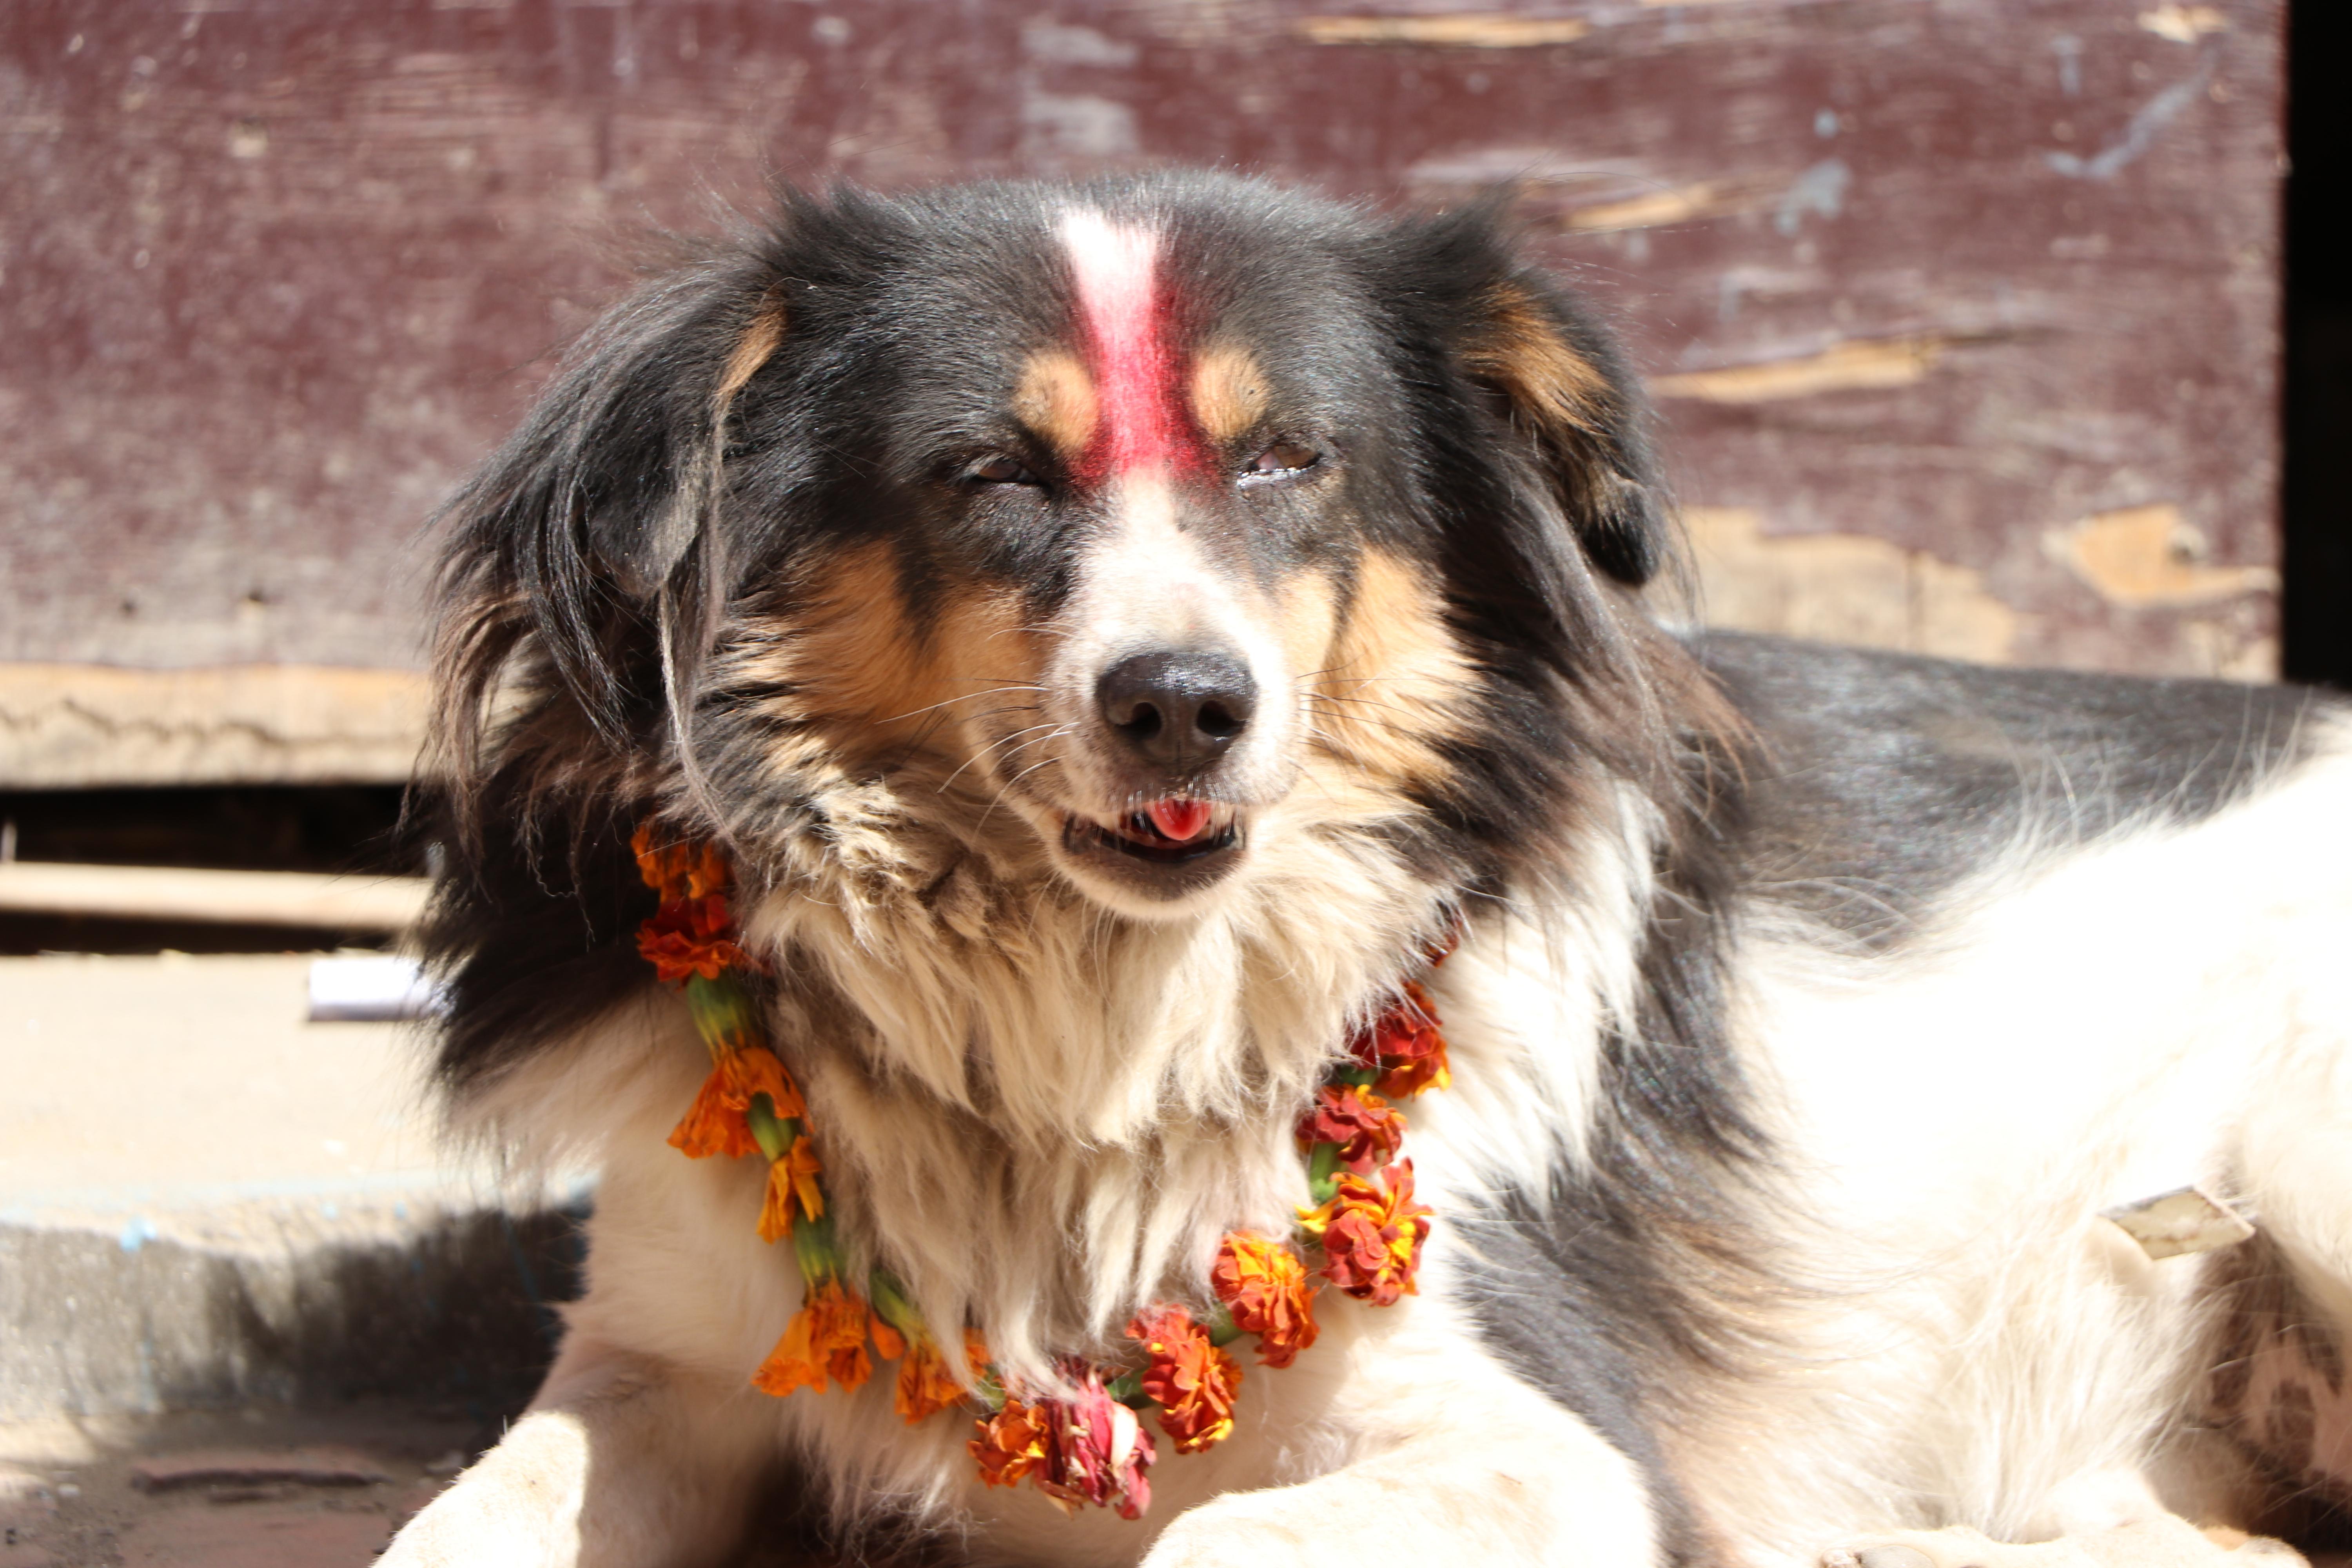 In Nepal they have the Tihar festival - their special day of love and respect for dogs.